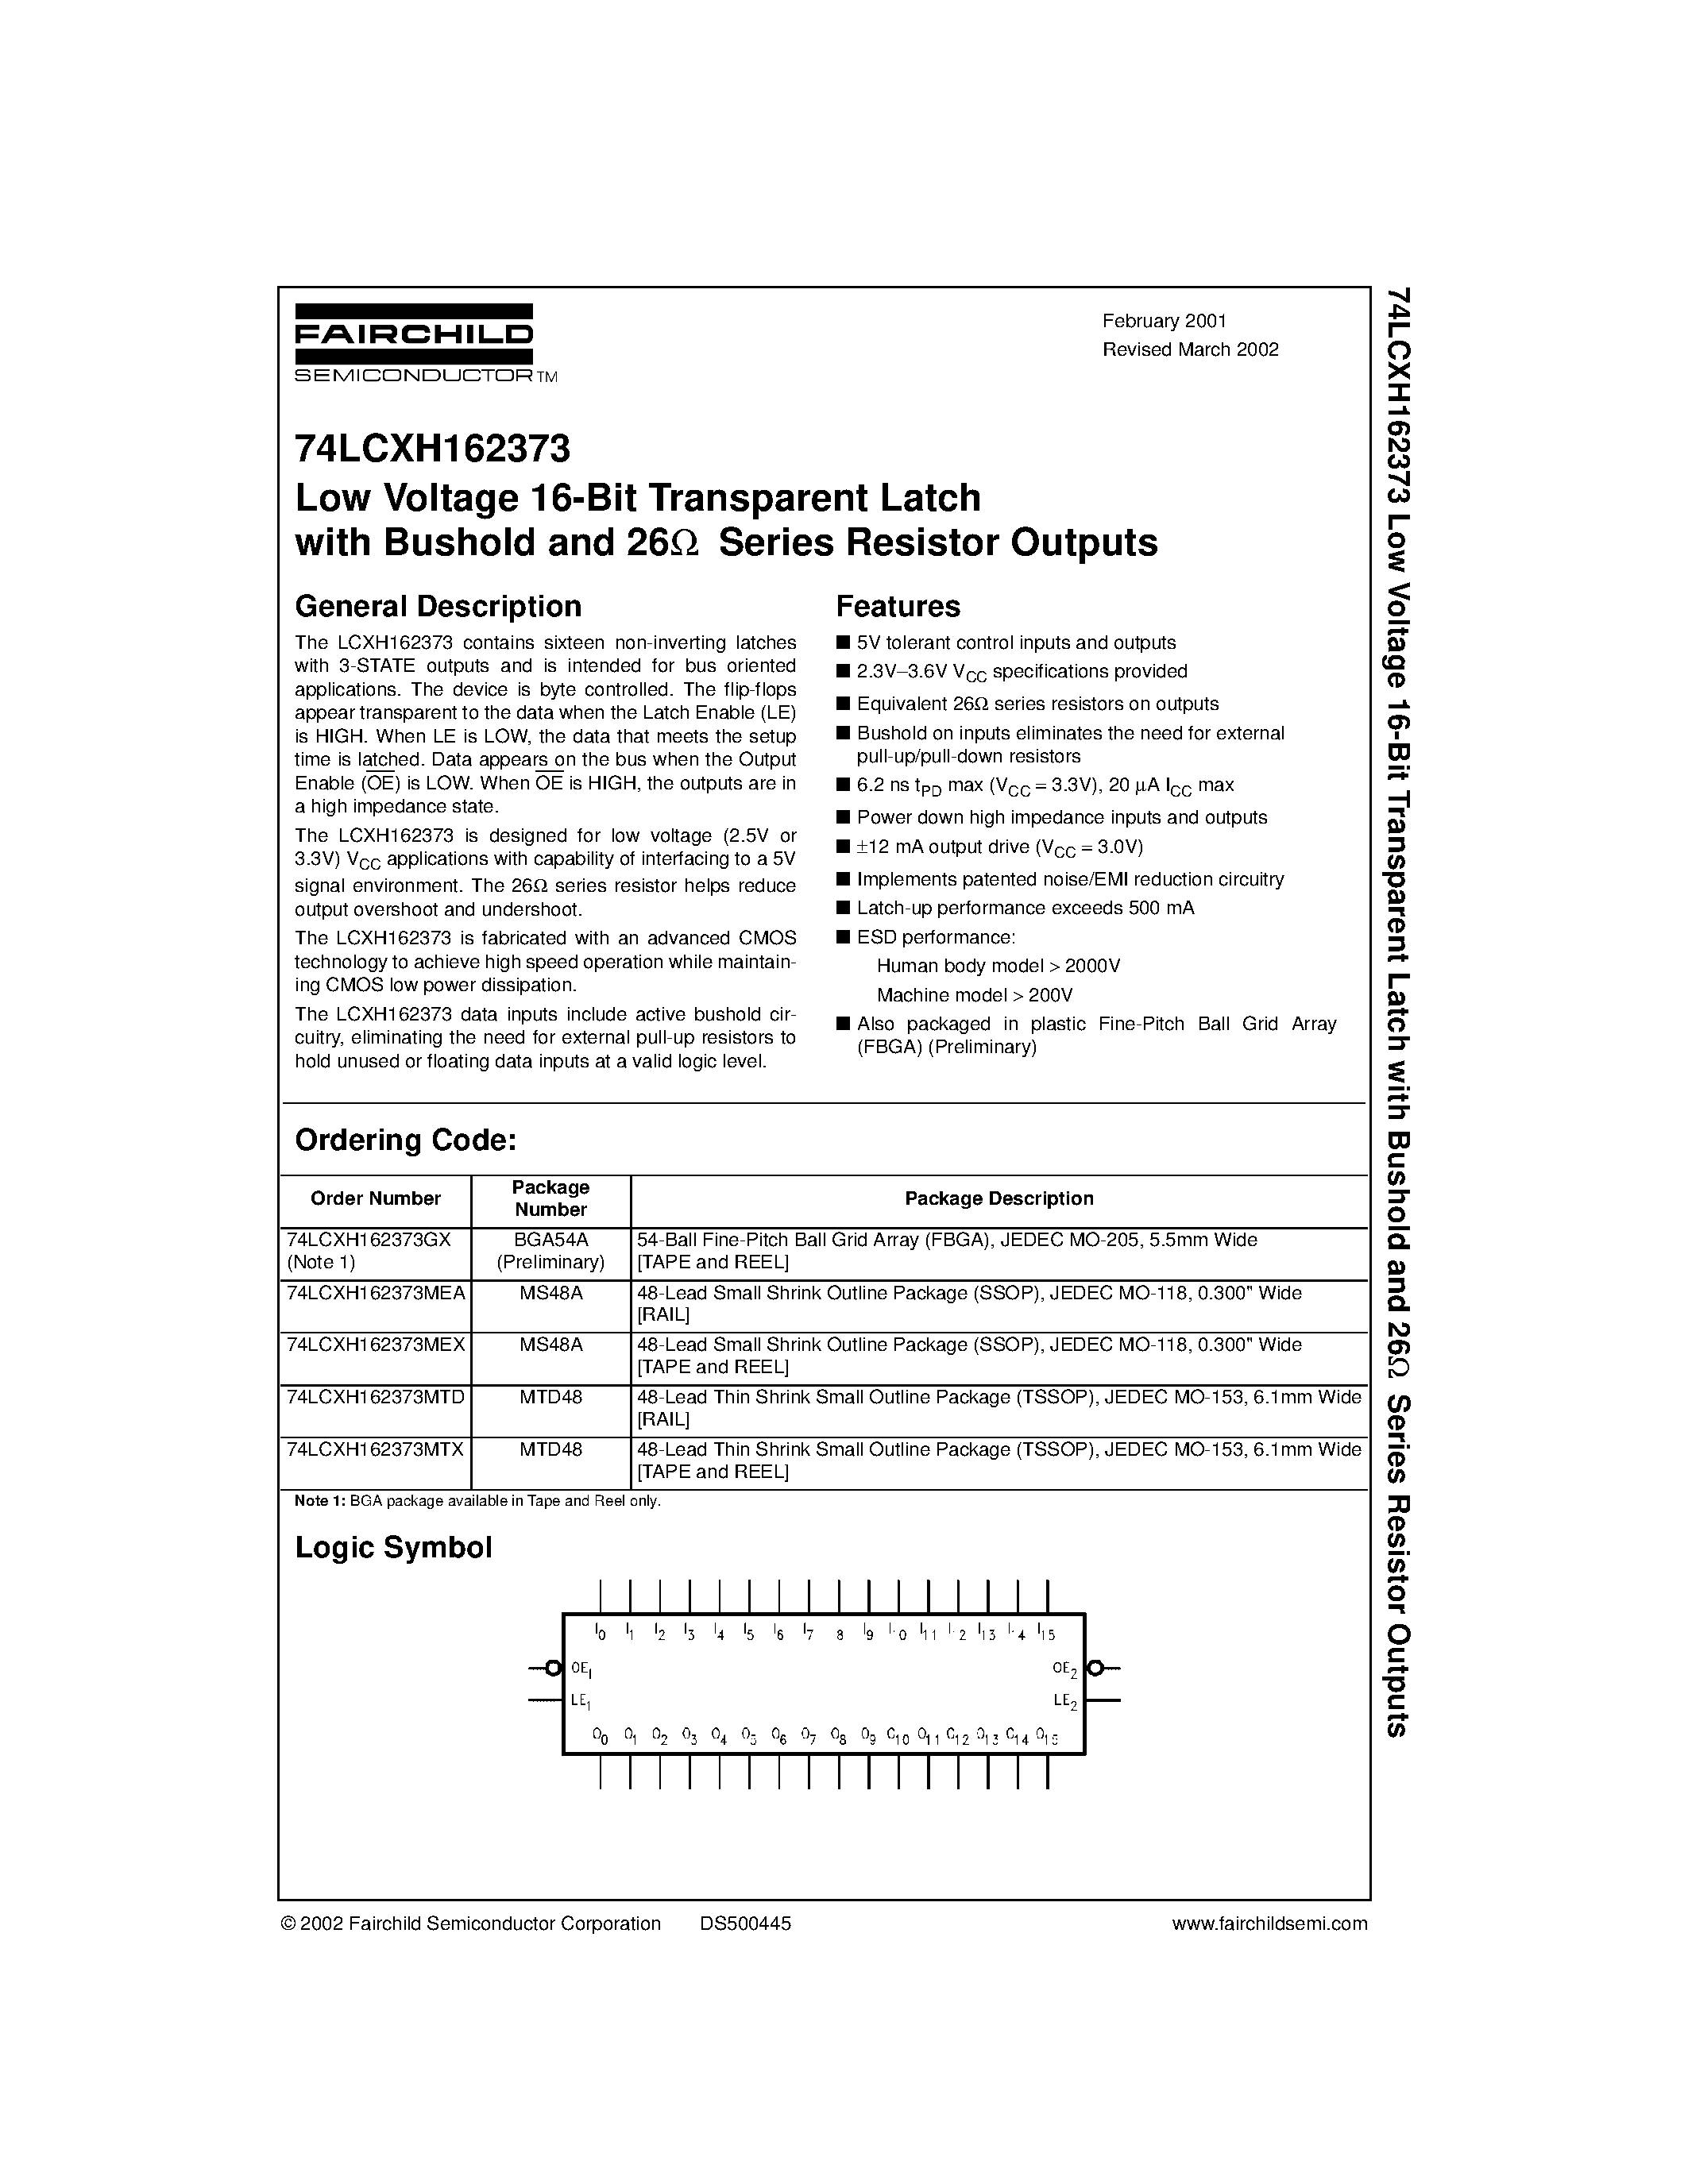 Datasheet 74LCXH162373MTX - Low Voltage 16-Bit Transparent Latch with Bushold and 26 Series Resistor Outputs page 1